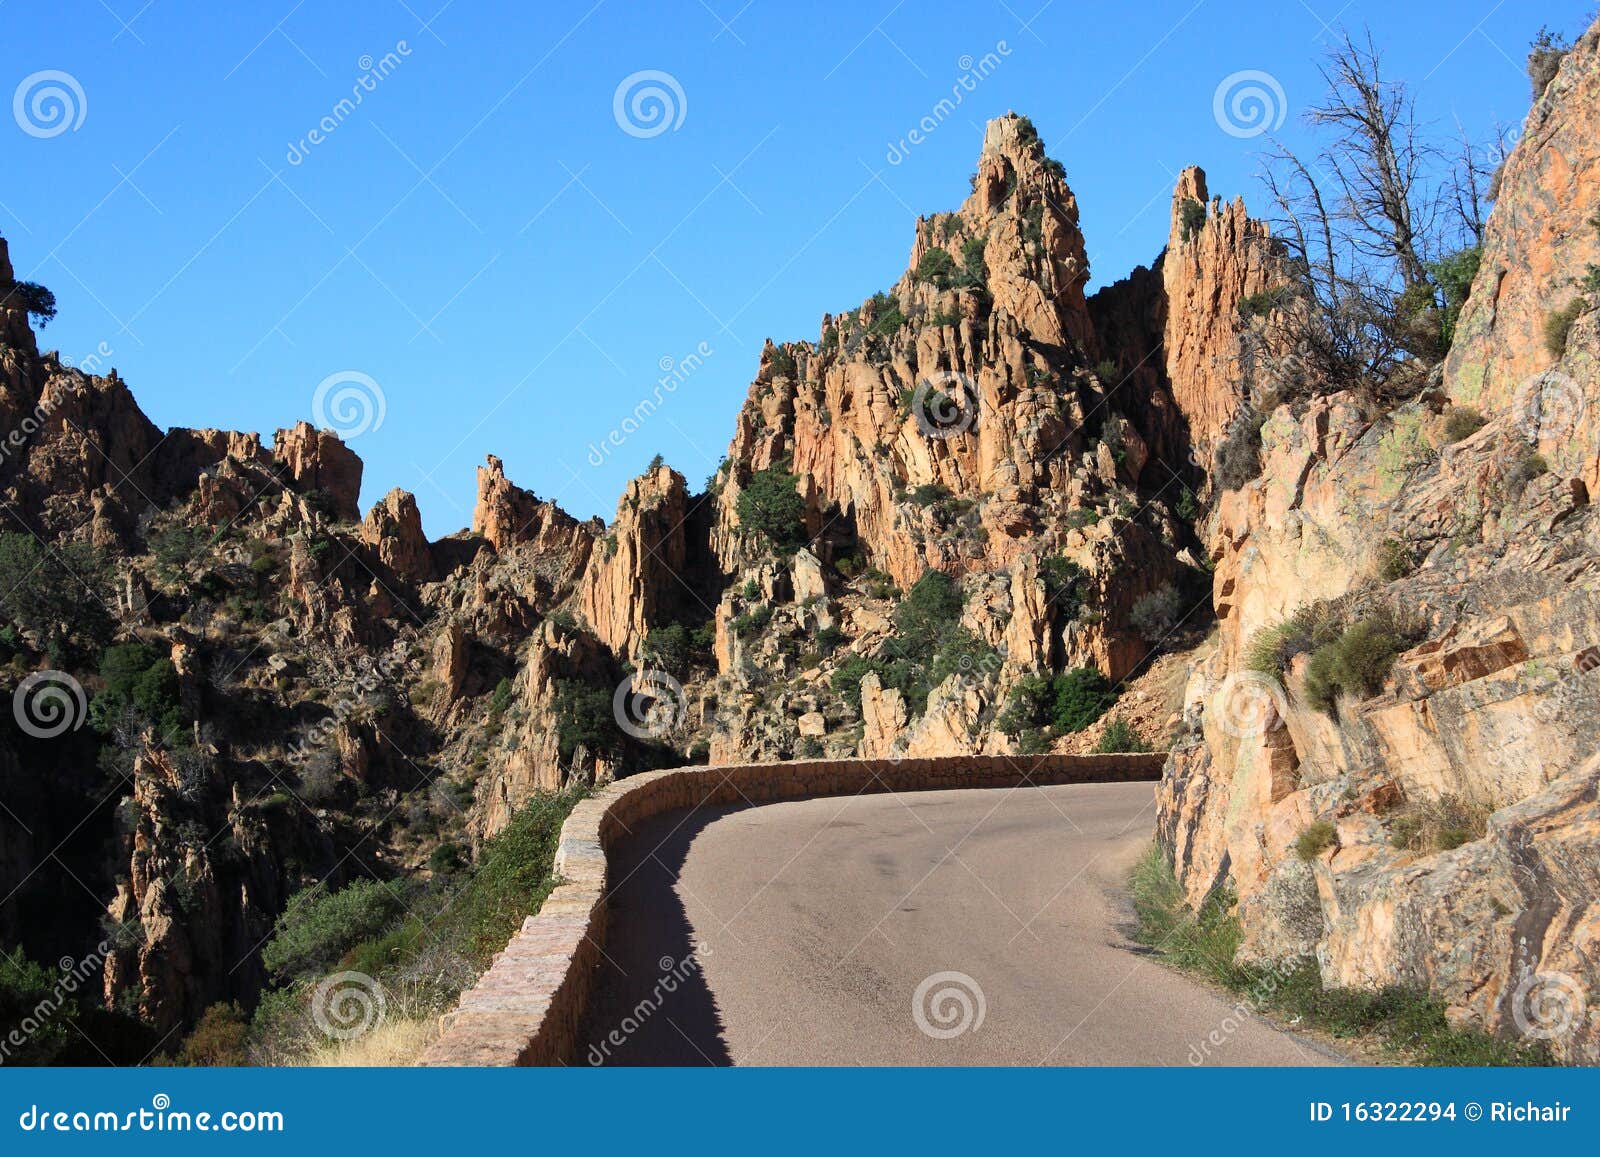 mountain road in the calanches, corsica